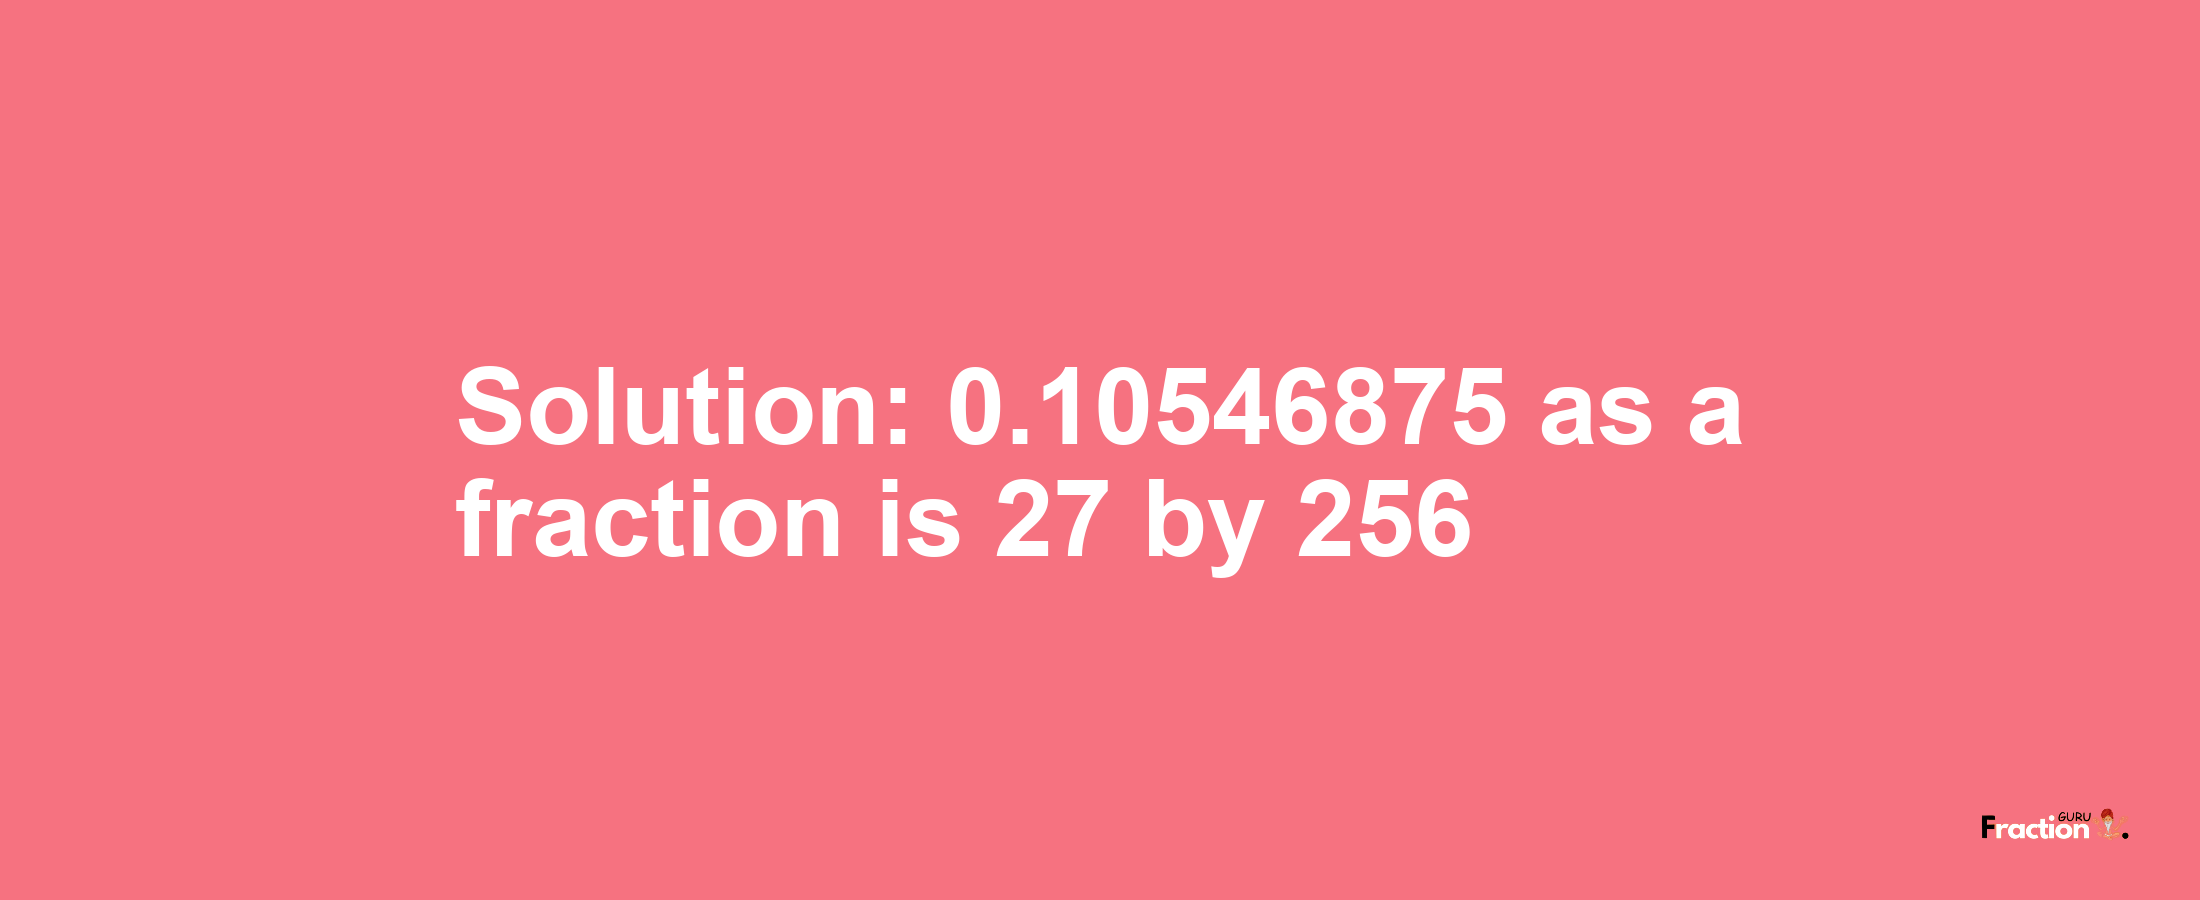 Solution:0.10546875 as a fraction is 27/256